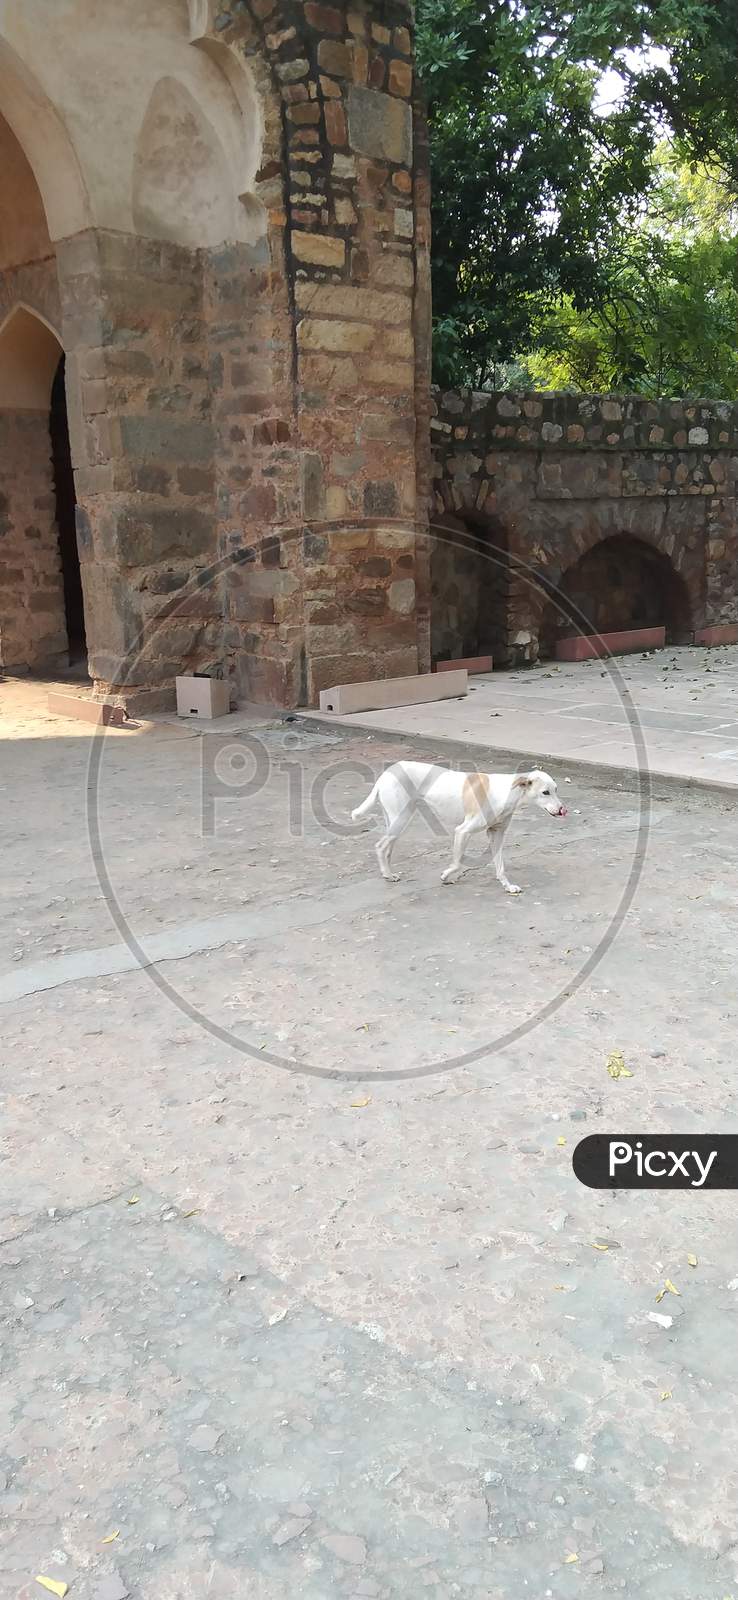 Hot weather, thirsty dog inside a monument floor